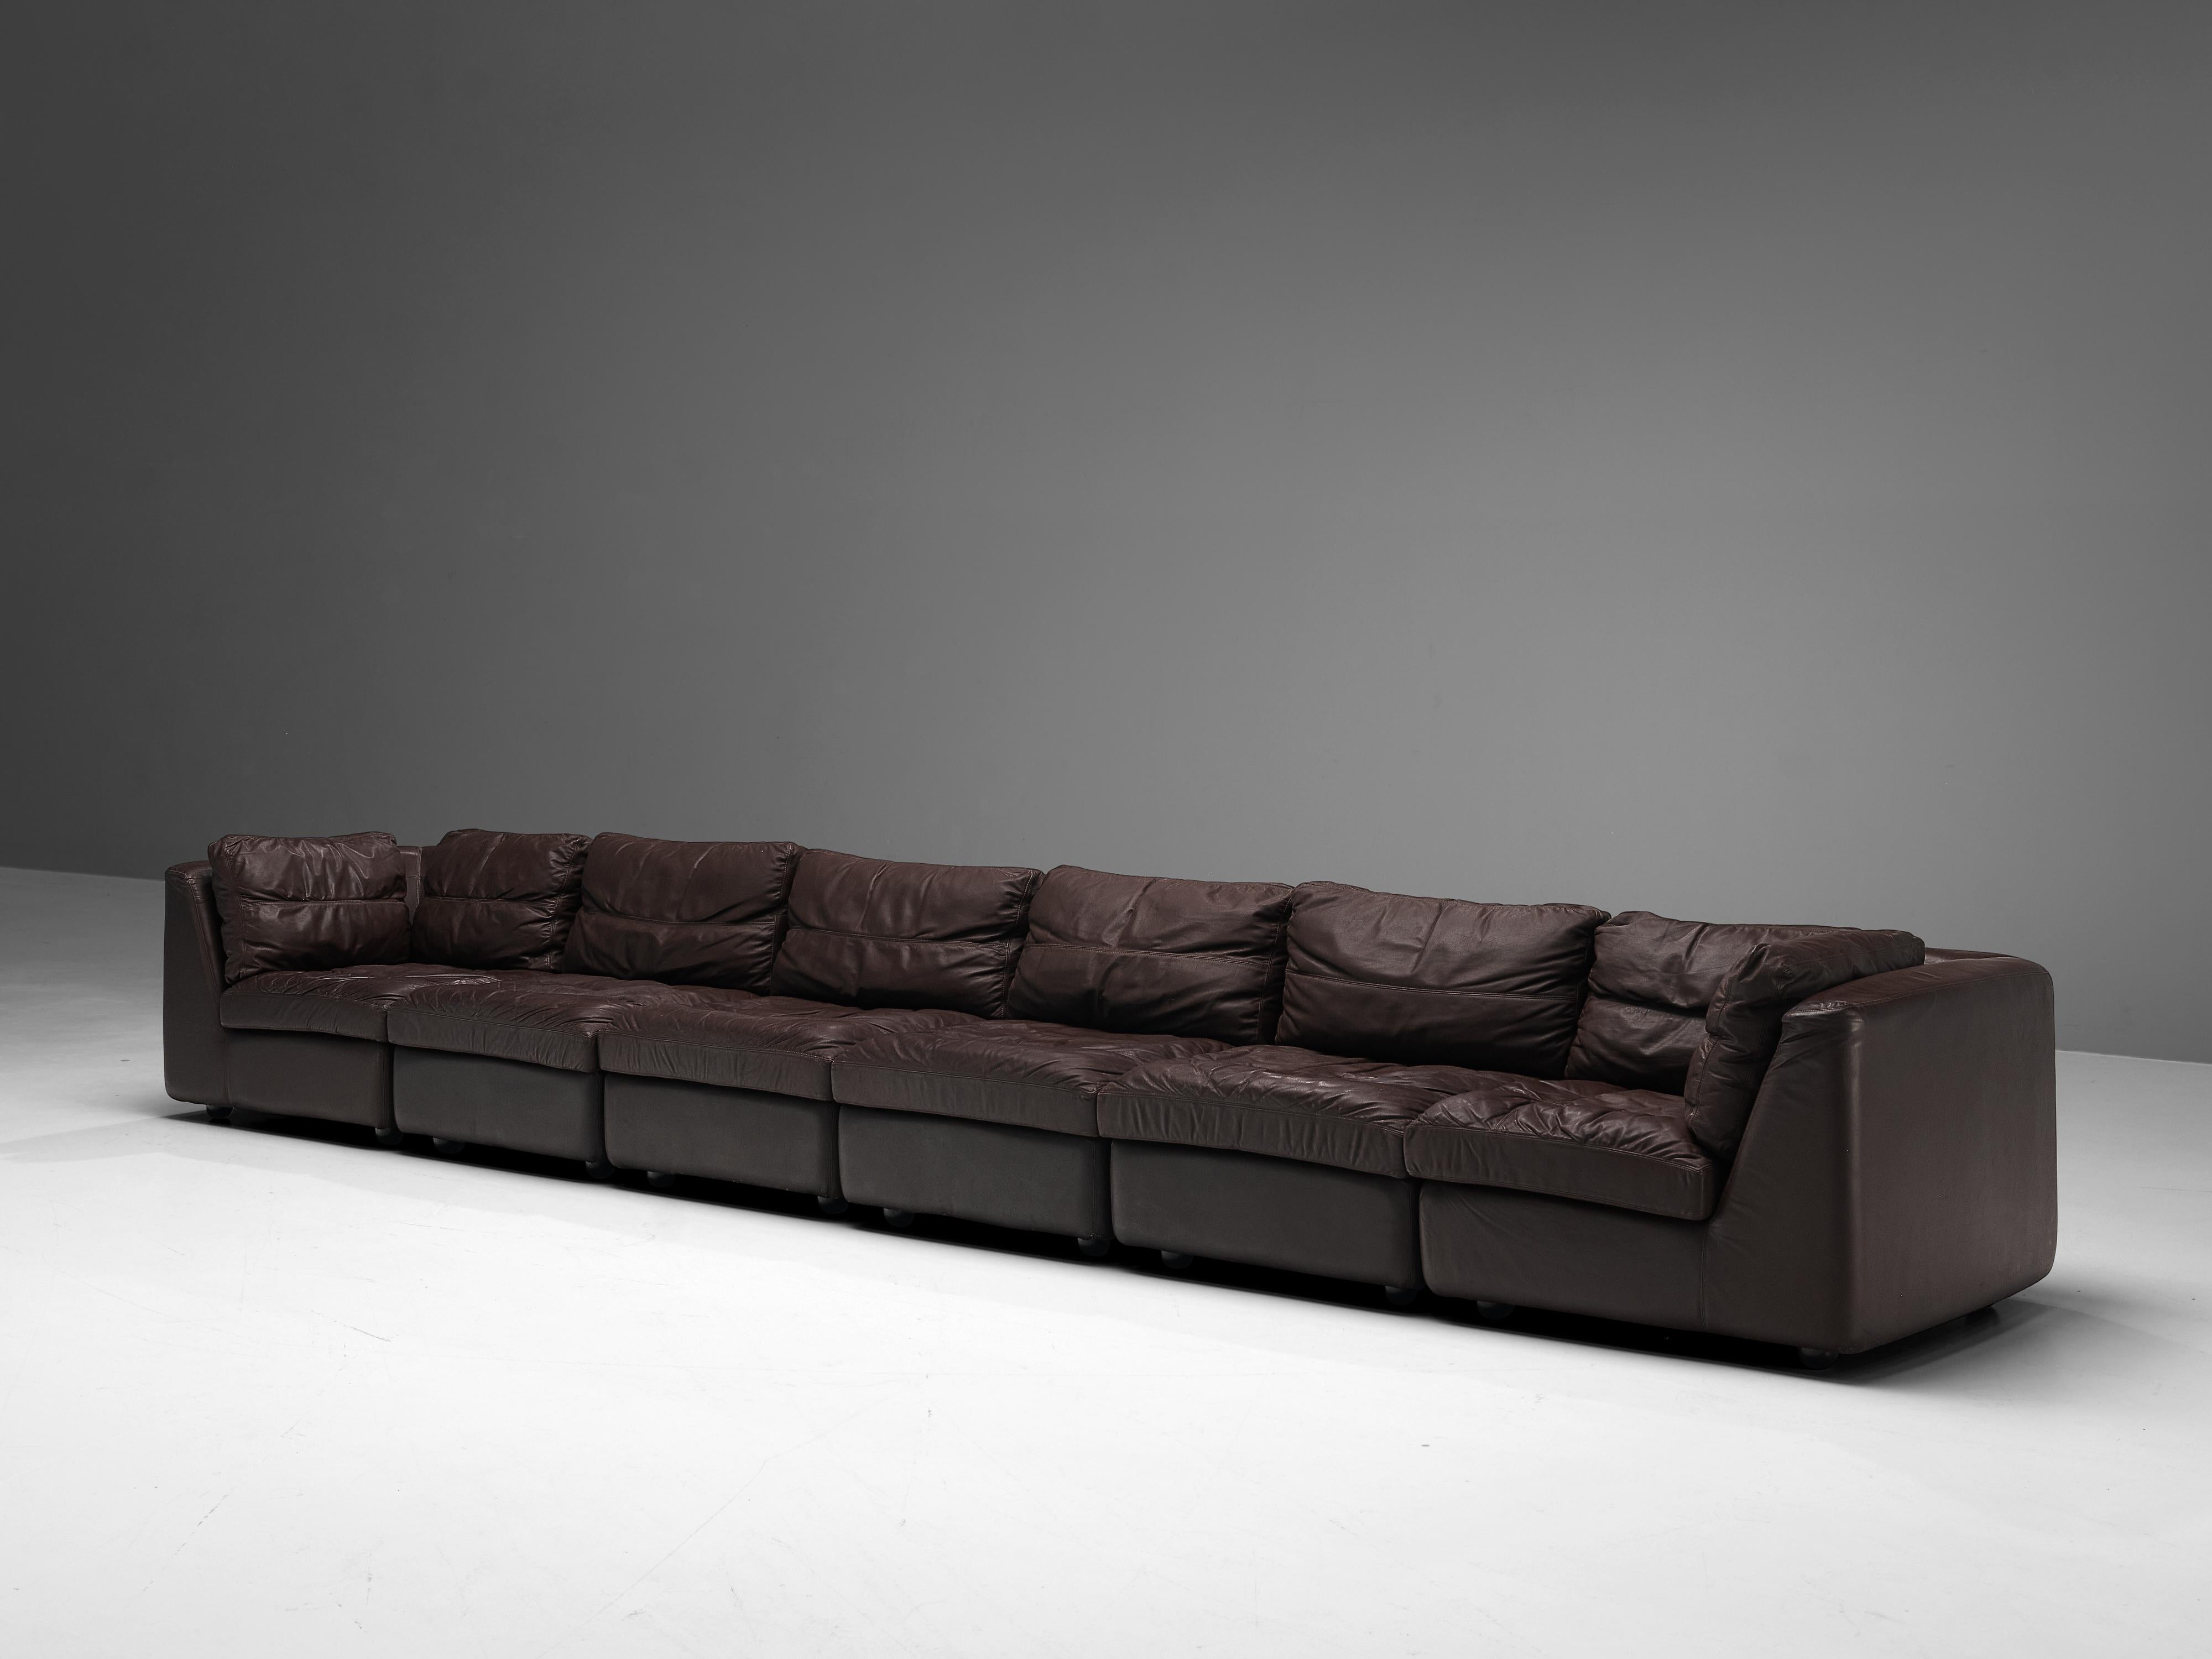 Sofa, patinated brown leather, Europe, 1970s

This comfortable leather sofa is made in high quality. The sofa features four seats and two corners, making it very versatile to create a composition to your own liking. The cushions are upholstered